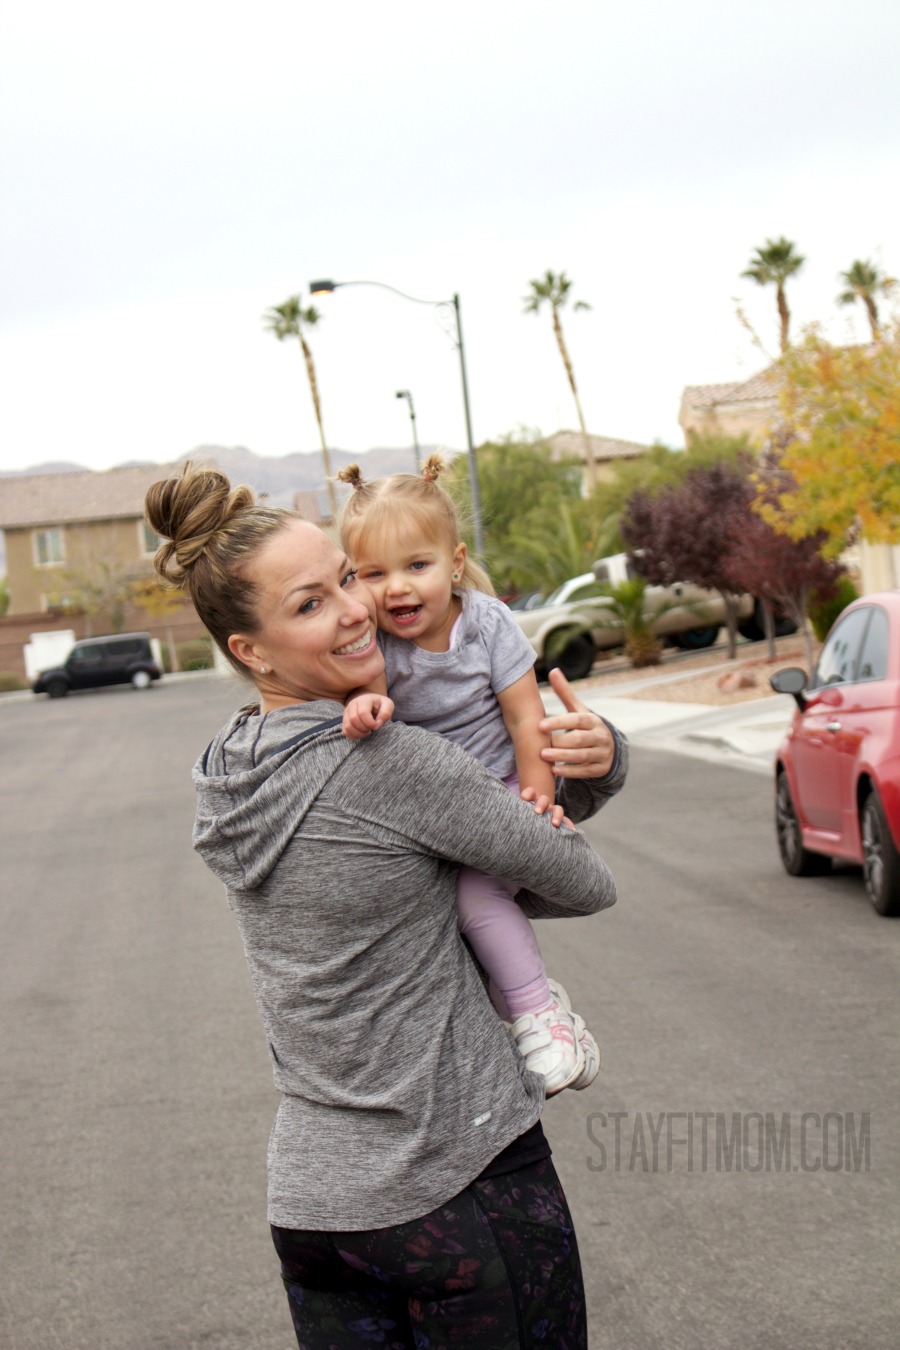 Free Home workouts for busy moms!